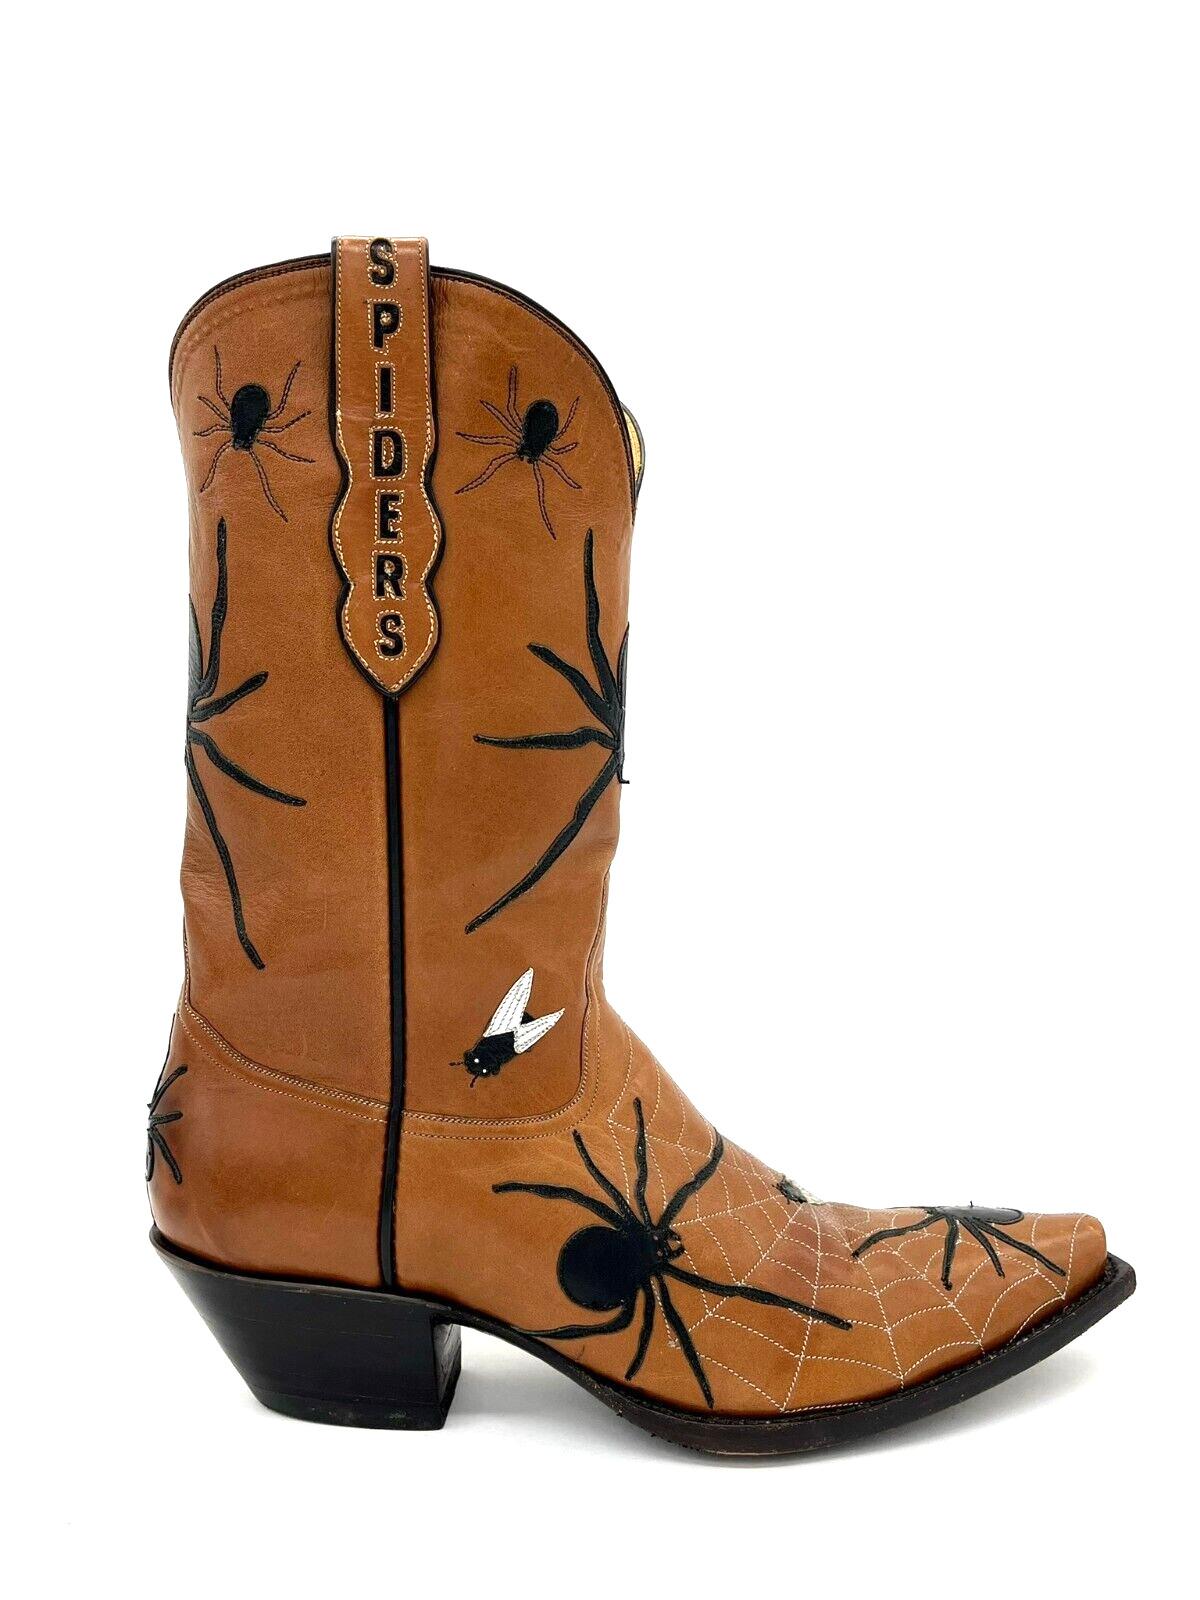 Handmade Cowboy Boots - Tres Outlaws  | 8.5C Women's Brown Black Leather